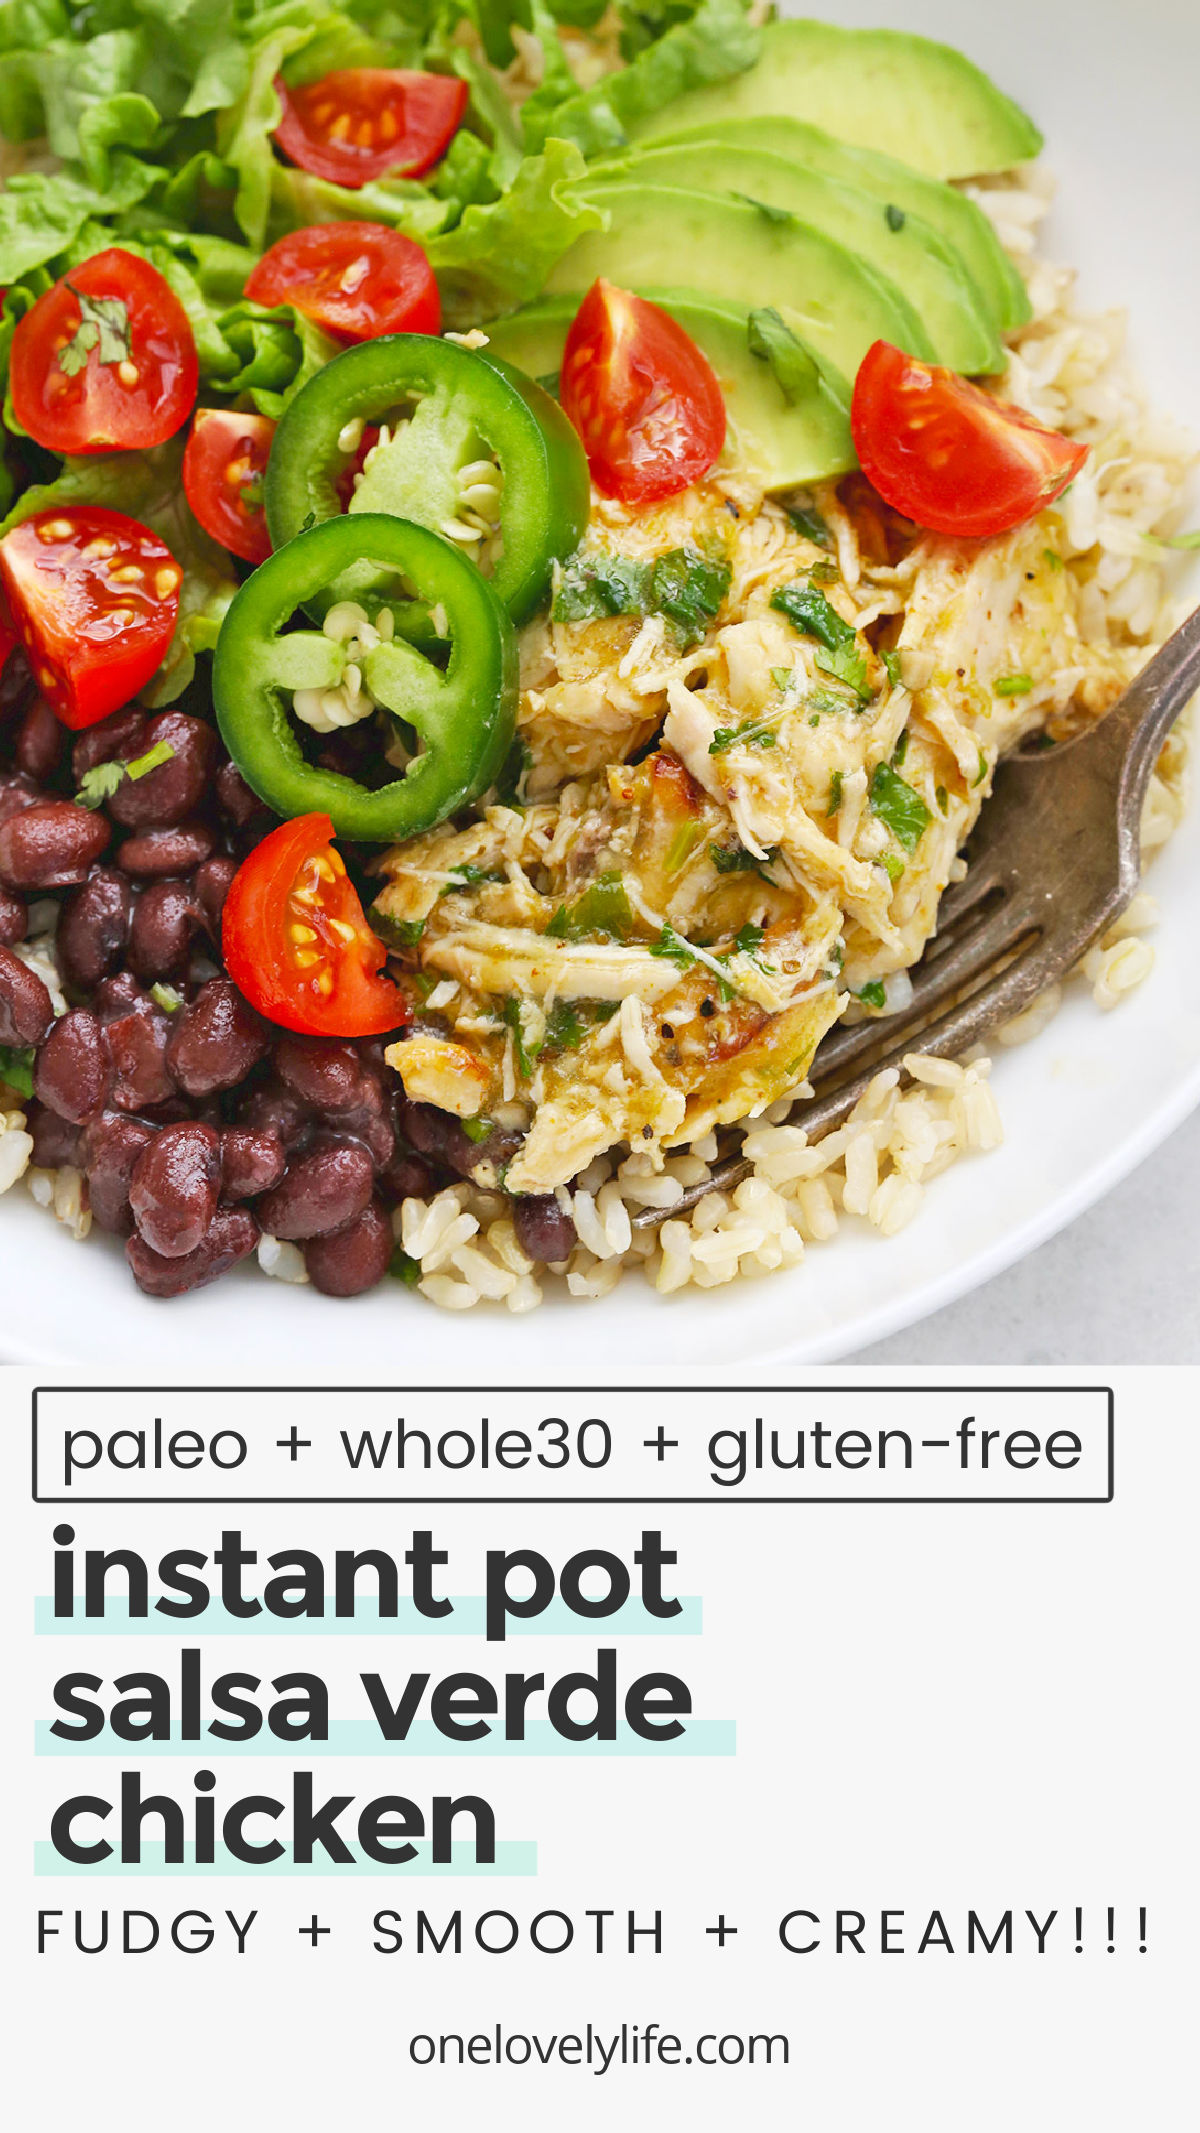 Instant Pot Salsa Verde Chicken - This Instant Pot shredded chicken uses green salsa + simple seasonings to make perfectly tender chicken that's perfect for burrito bowls, tacos, nachos, and more! (Gluten-Free, Paleo, Whole30) // Pressure Cooker Salsa Verde Chicken // Pressure Cooker Salsa Chicken // Instant Pot Salsa Chicken / instant pot chicken recipe // salsa verde chicken recipe